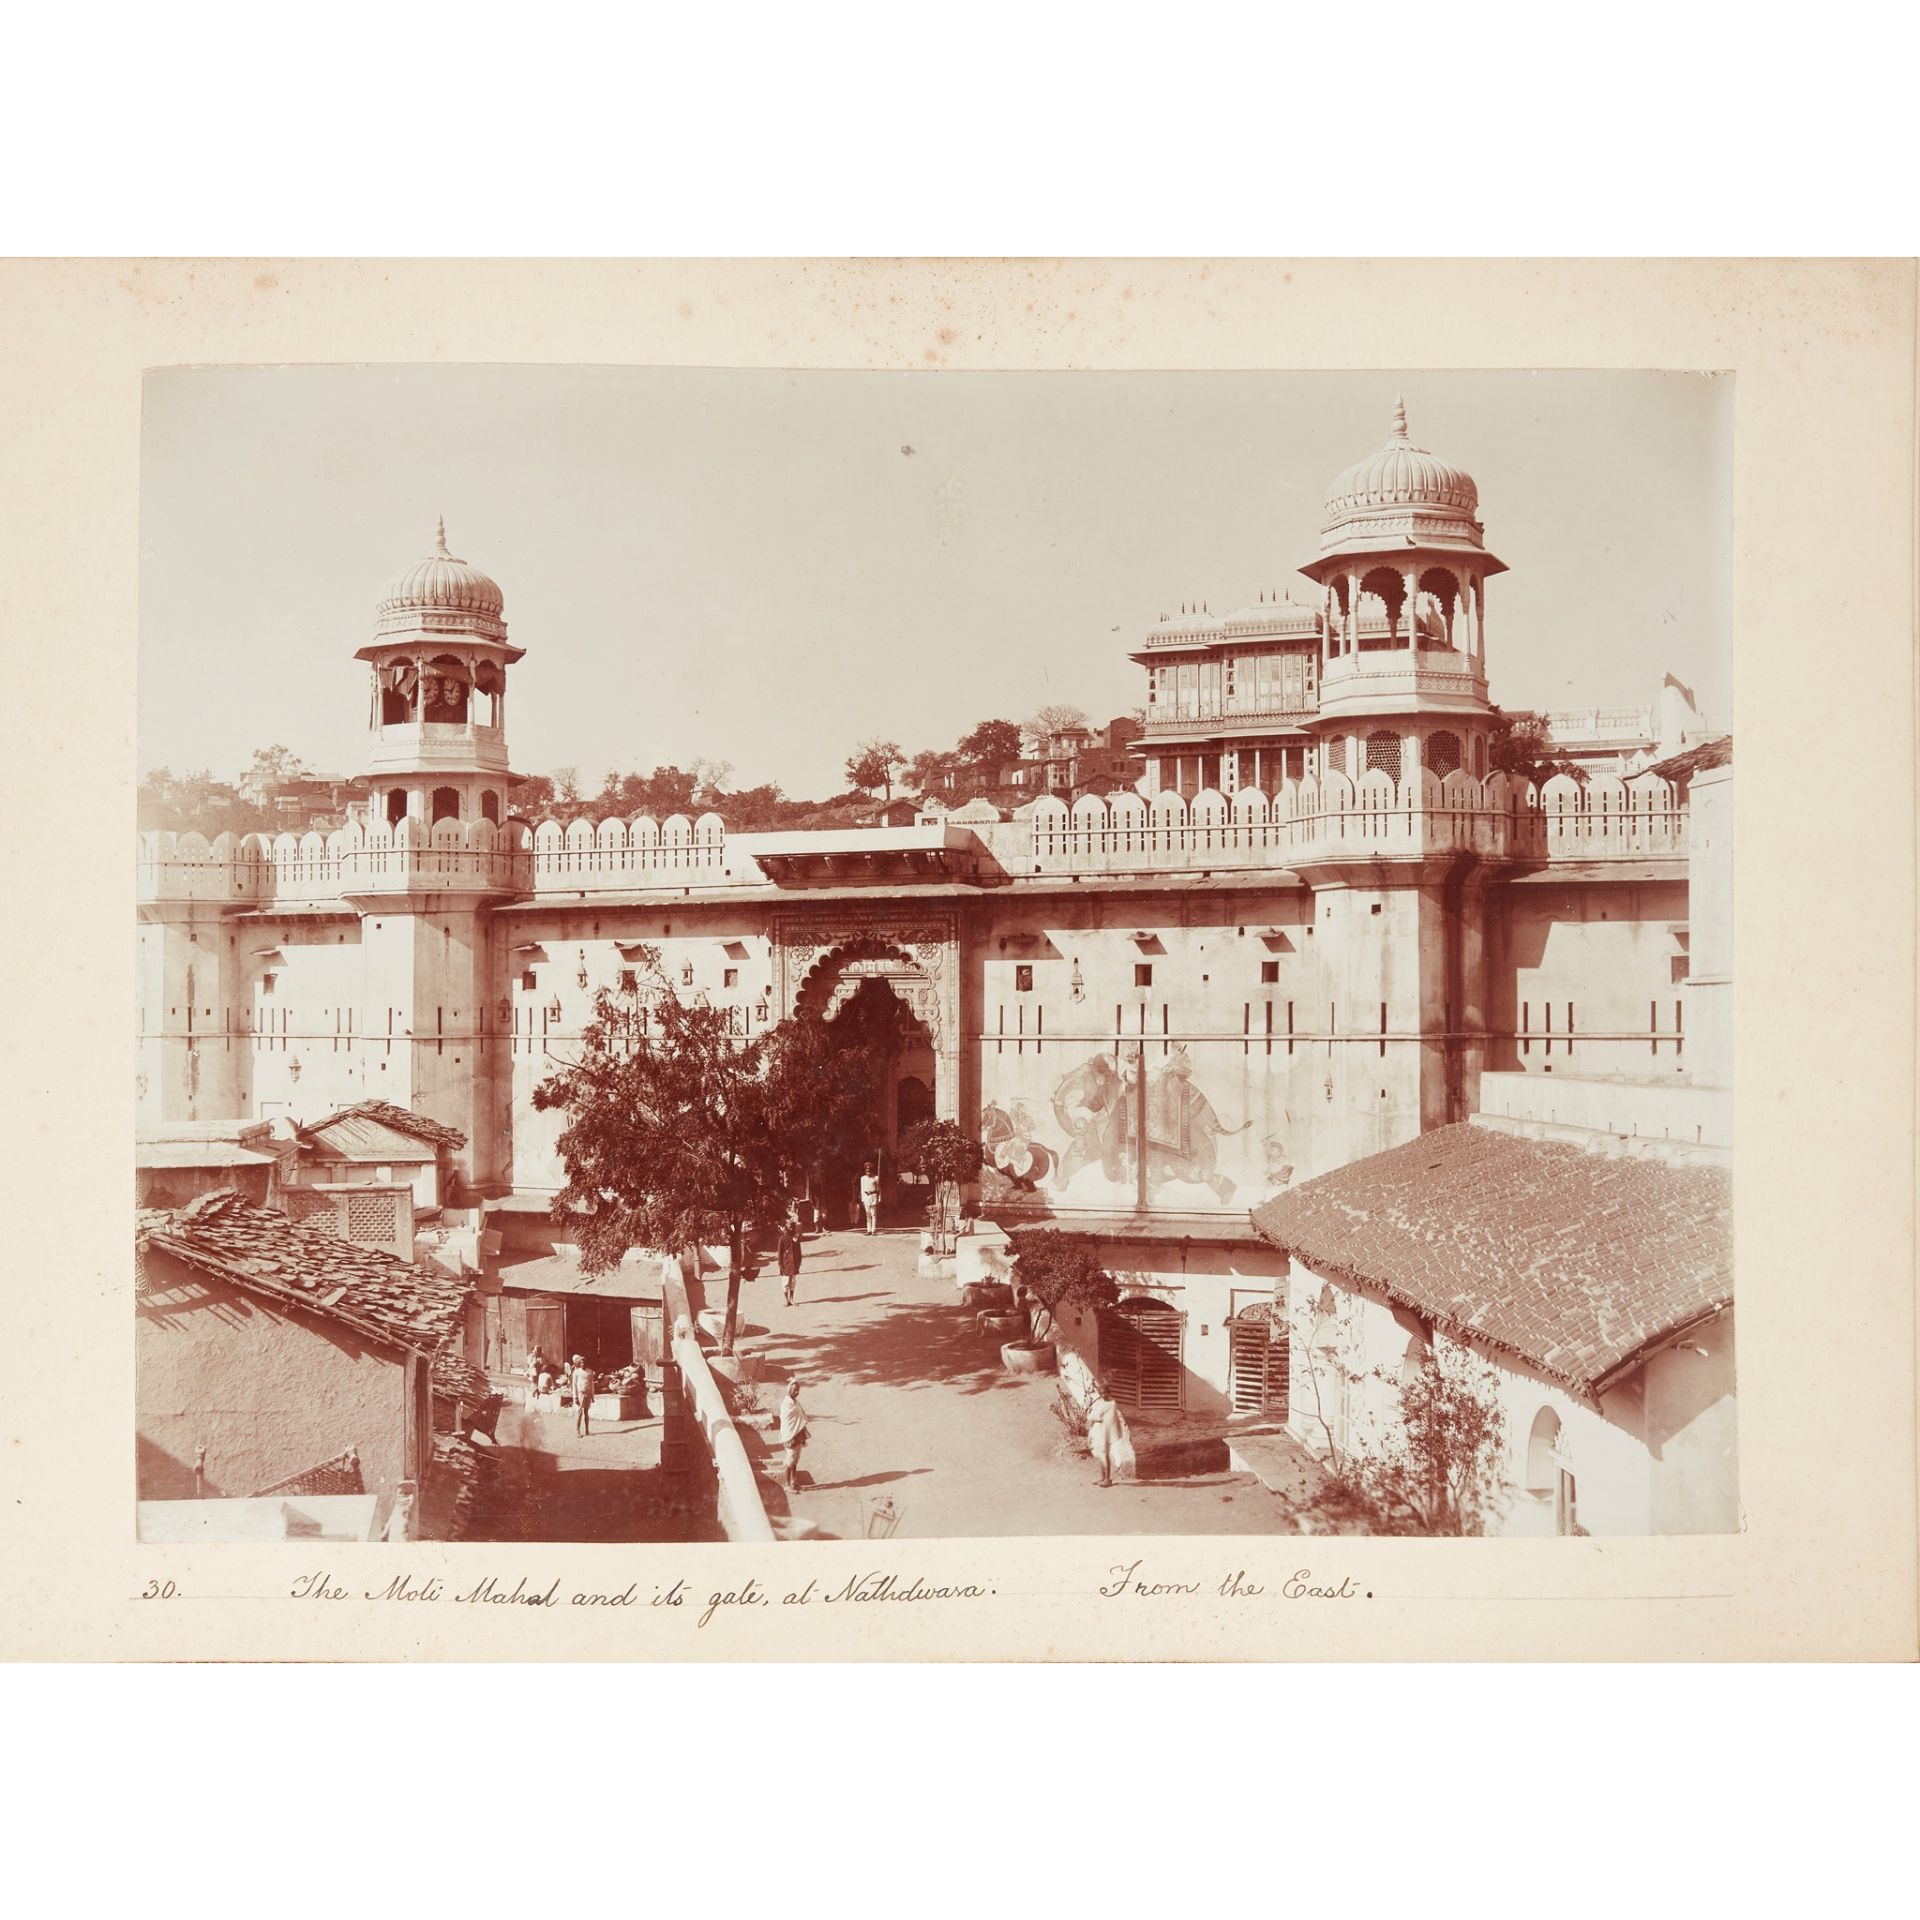 India: a photograph album Photographs of Rajasthan by Mohan Lal of Udaipur, late 19th century - Image 3 of 23